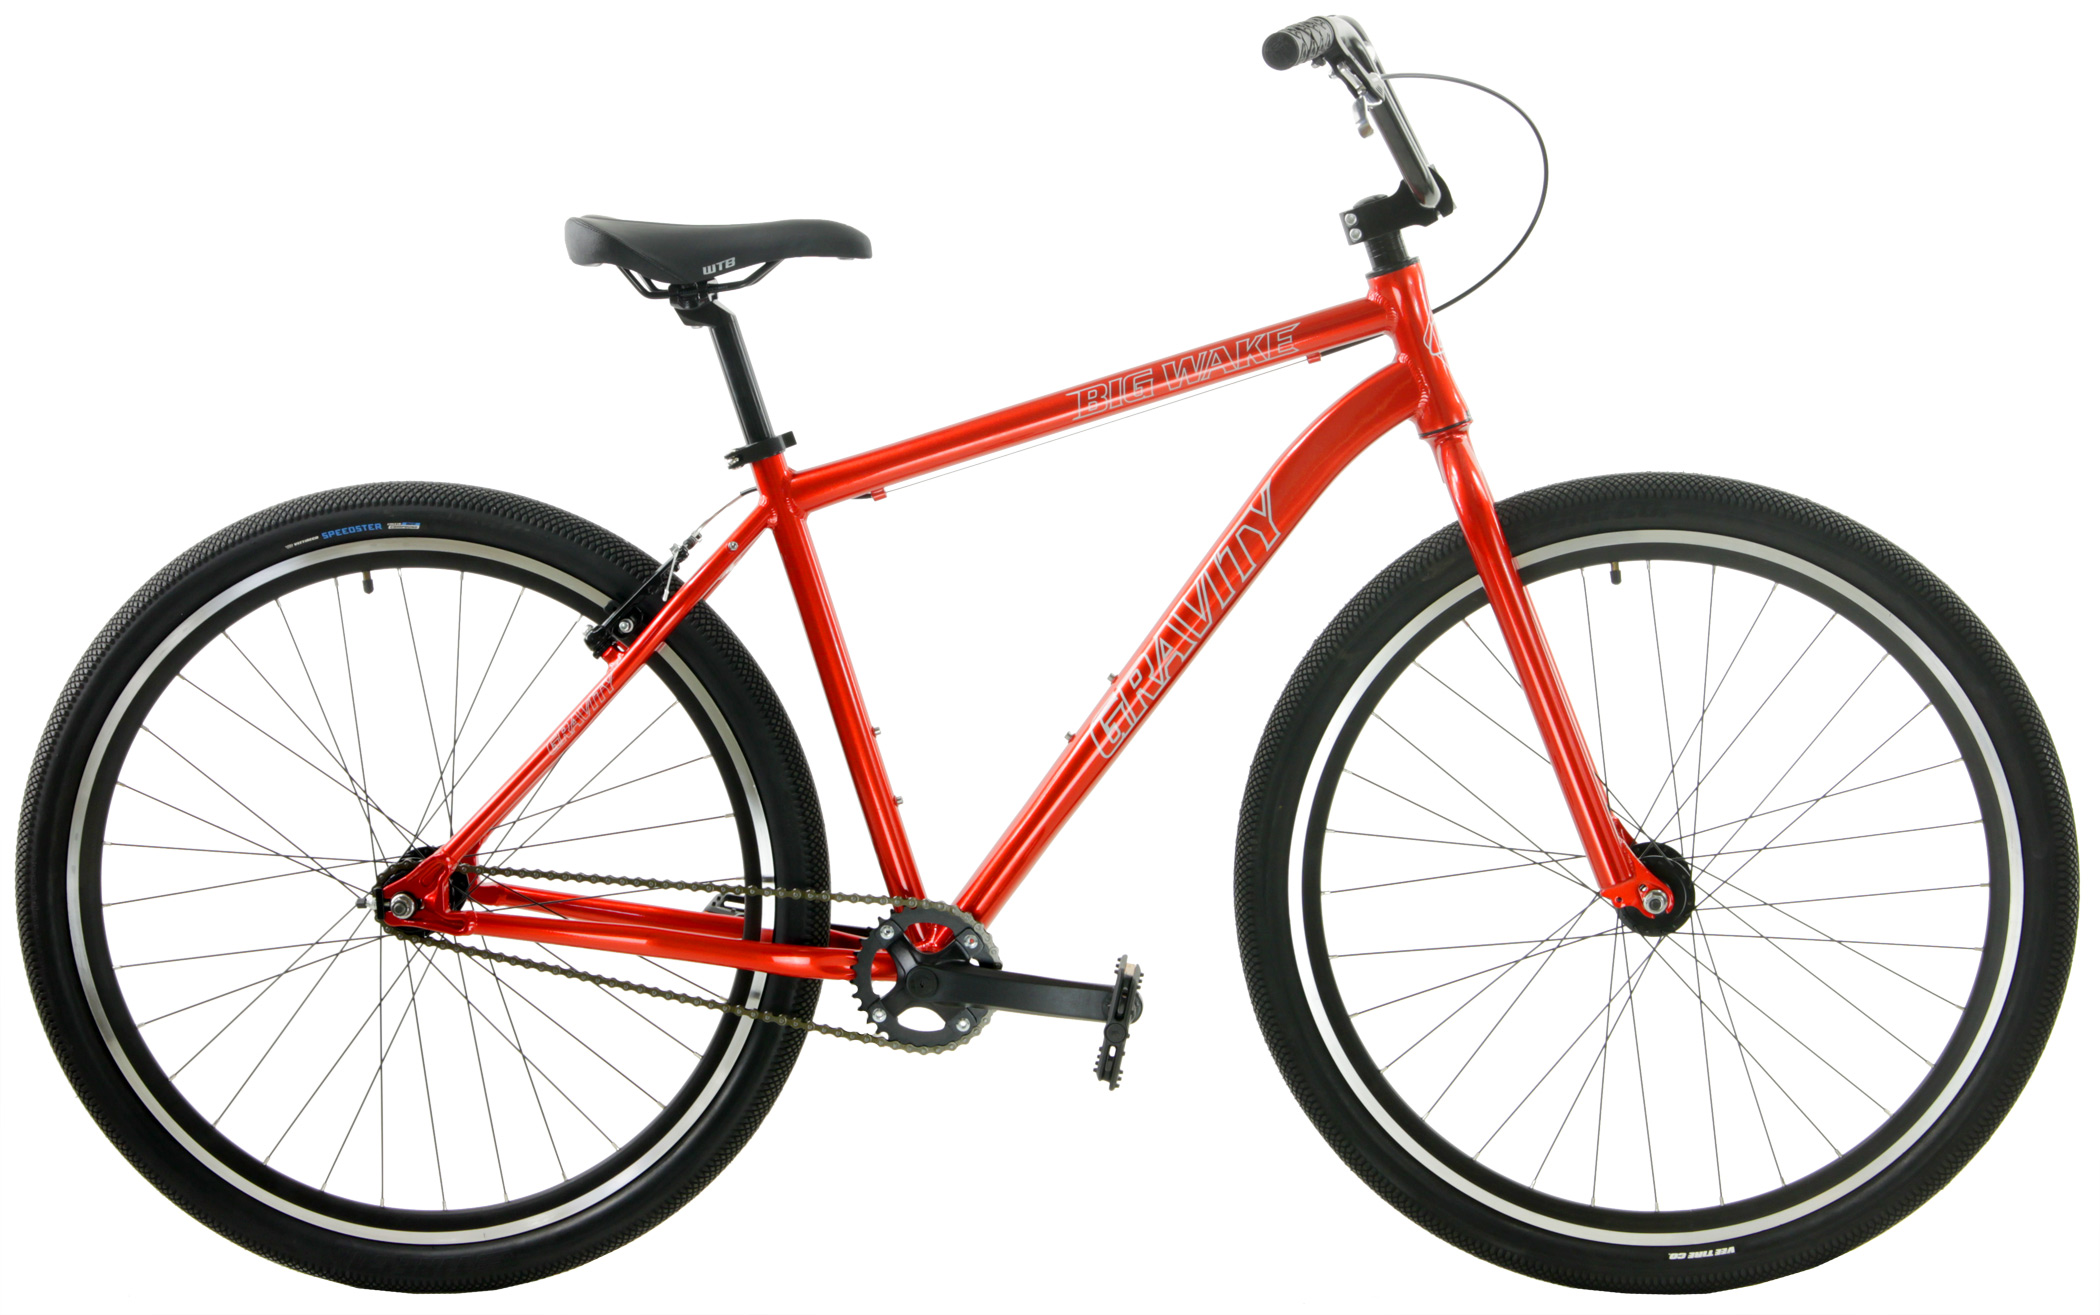 Save up to 60% off new Adult BMX ALL BIKES FREE SHIP 48 Save Up to 60% Off Gravity Big Wake 